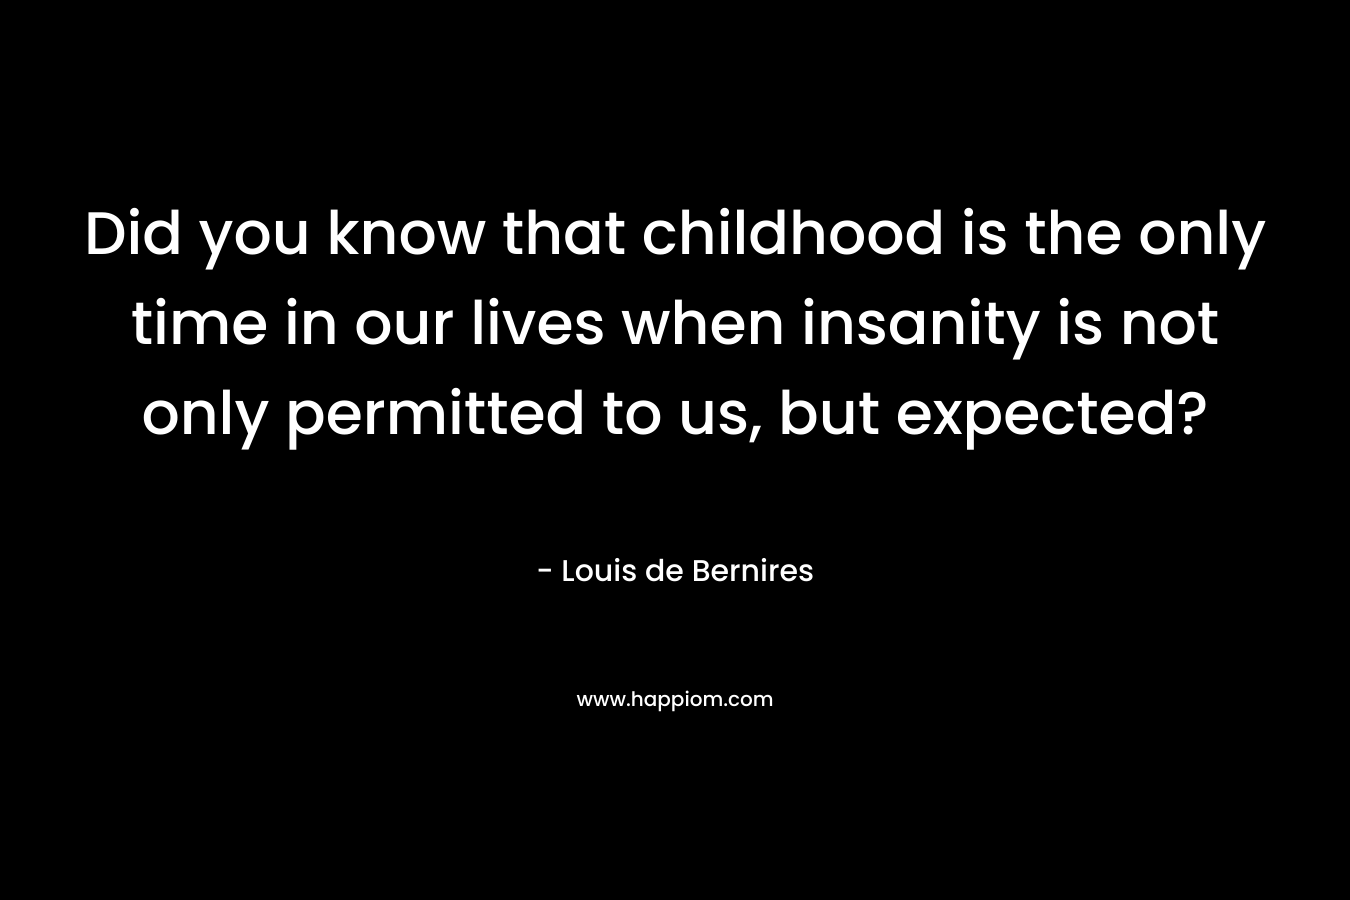 Did you know that childhood is the only time in our lives when insanity is not only permitted to us, but expected?